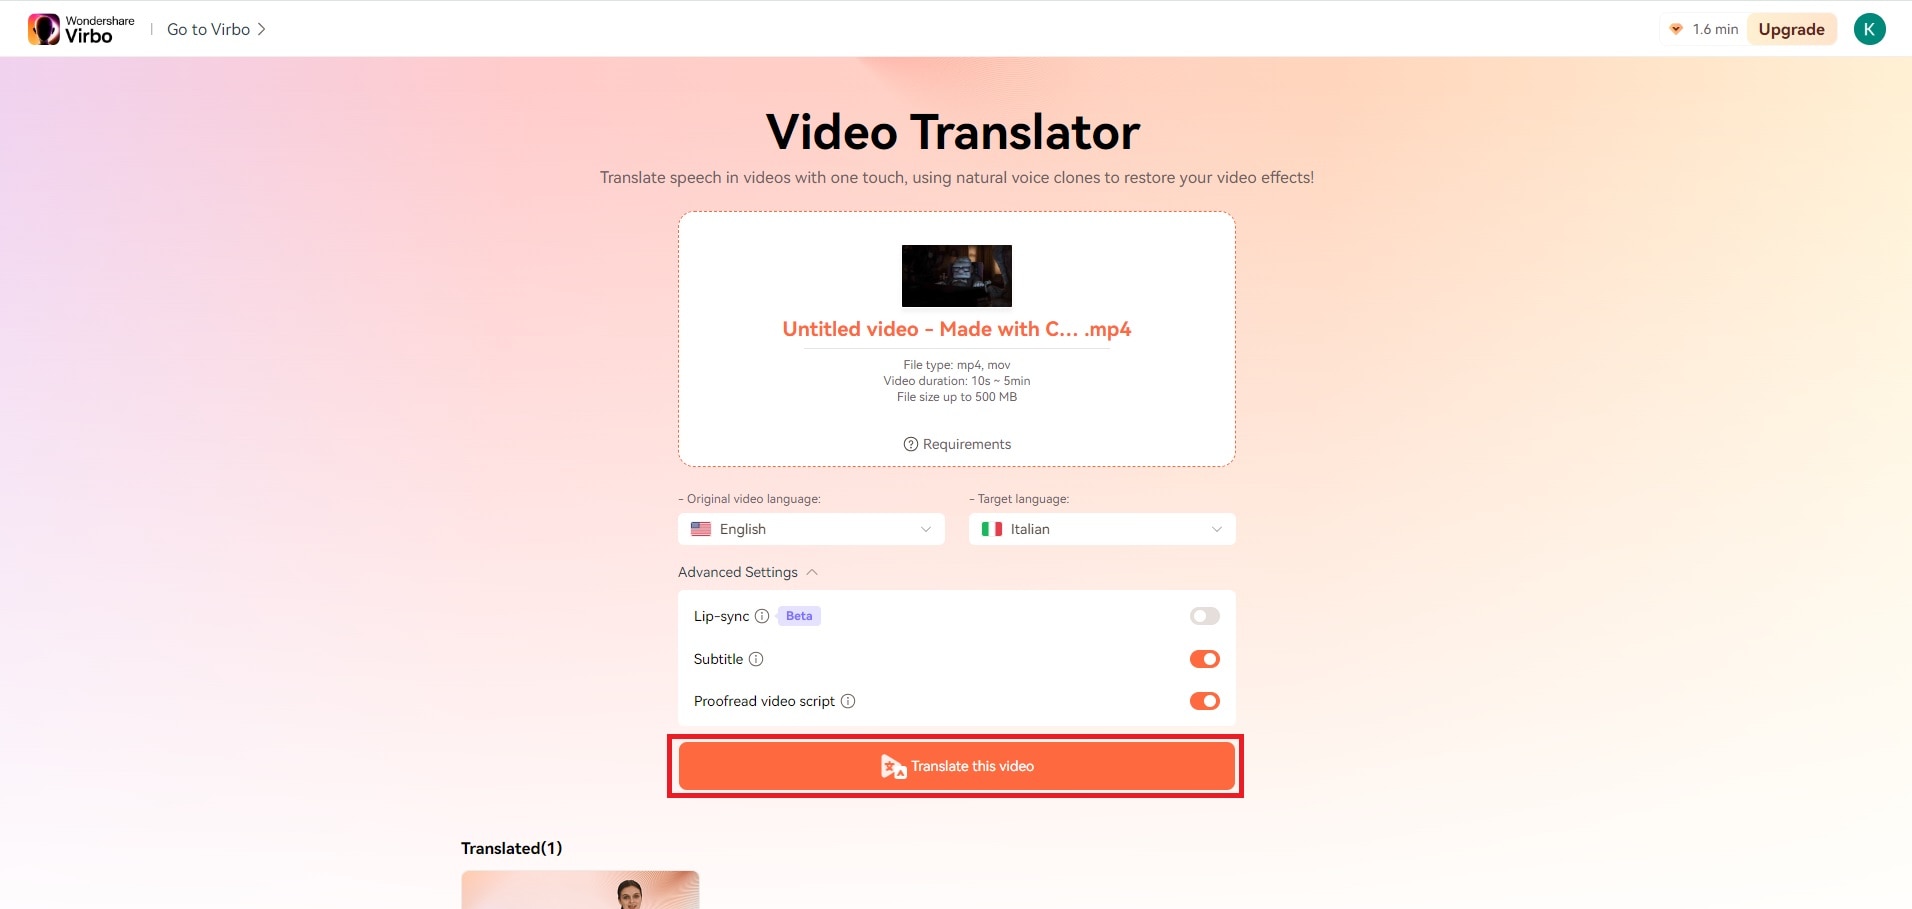 translate the video button